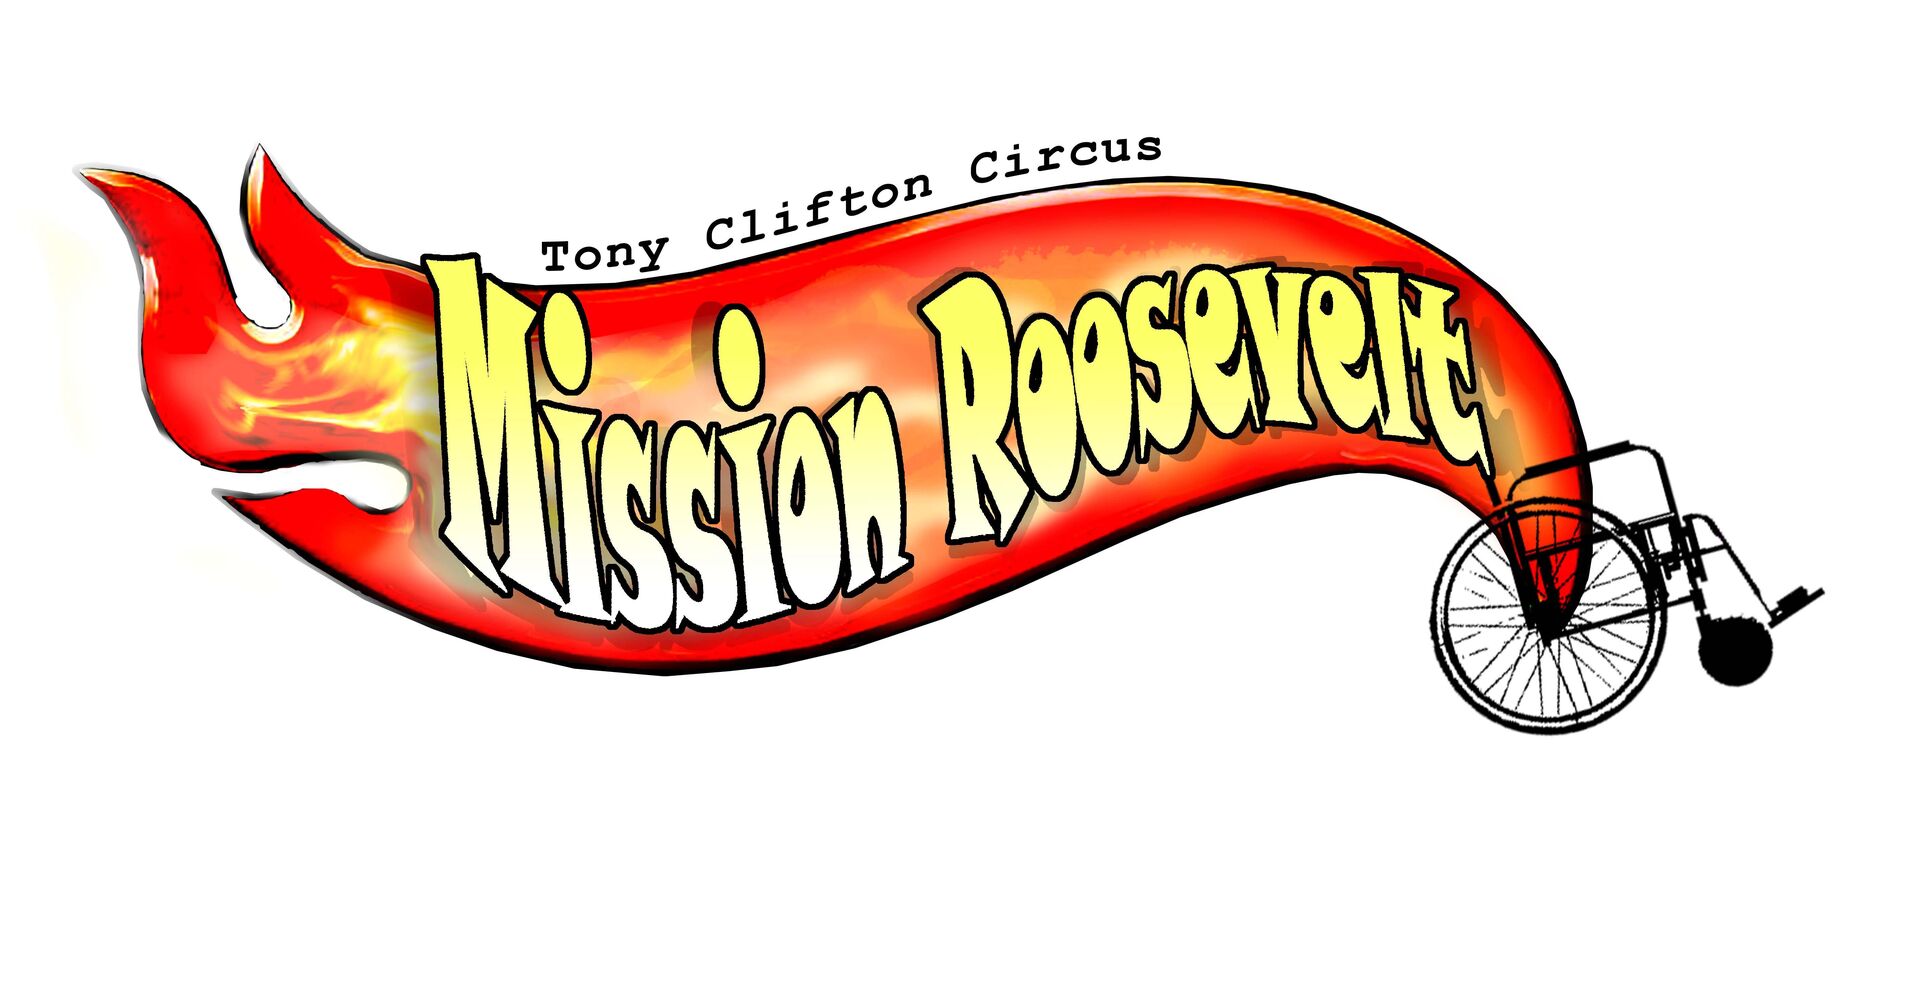 Tony Clifton Circus - Mission Roosevelt (12+) 